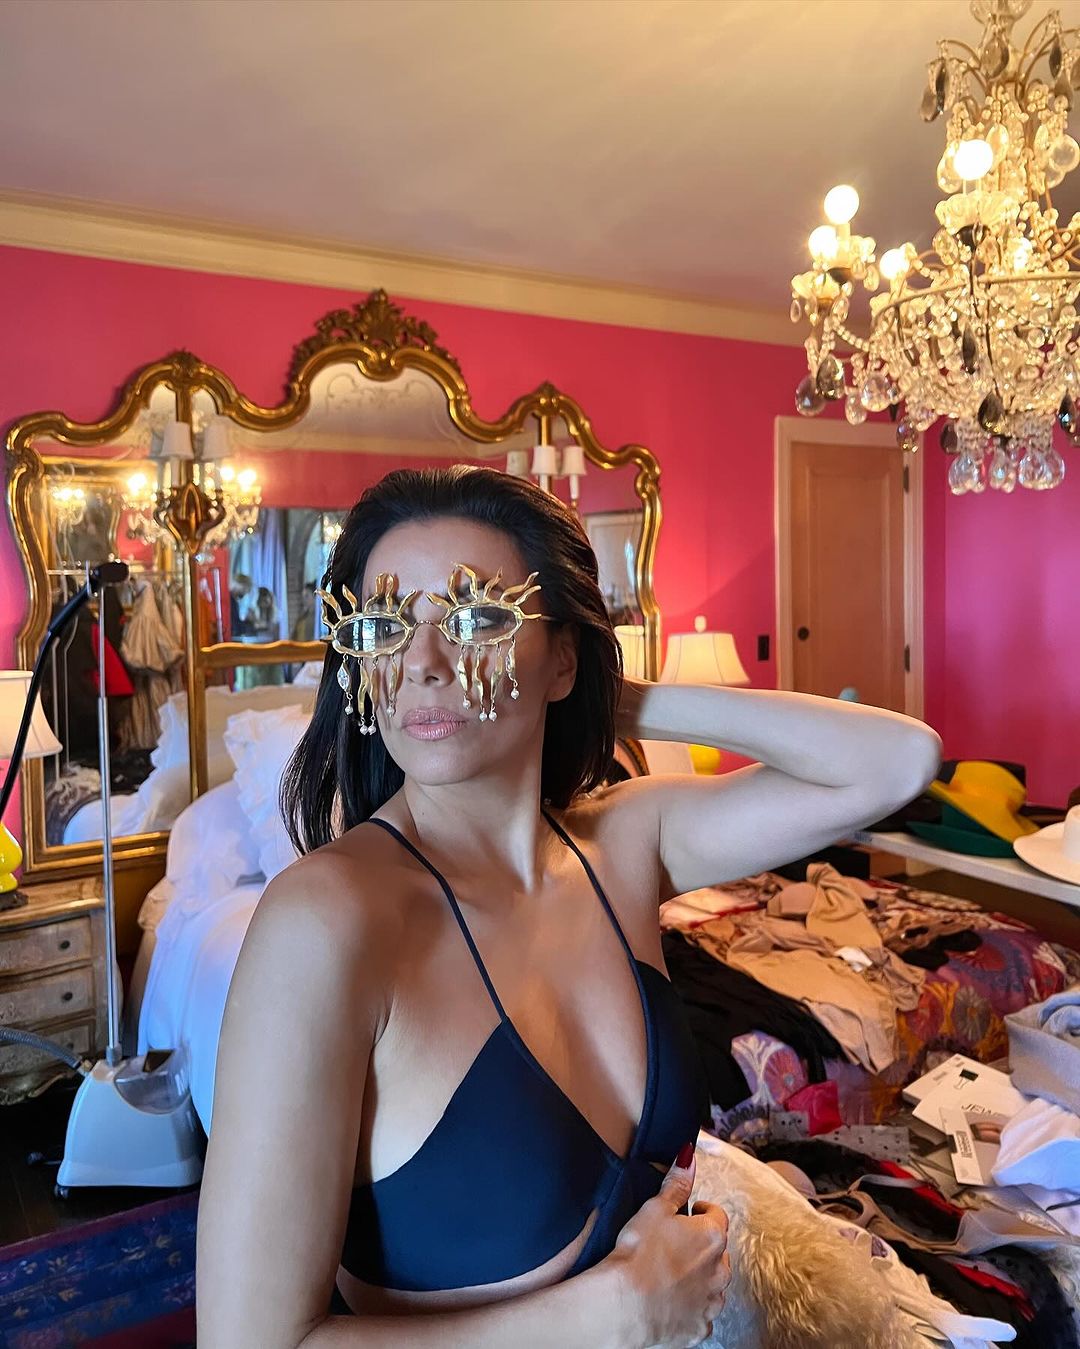 The star was surrounded by clothes and clutter as she posed in a plunging dress and high-fashion glasses